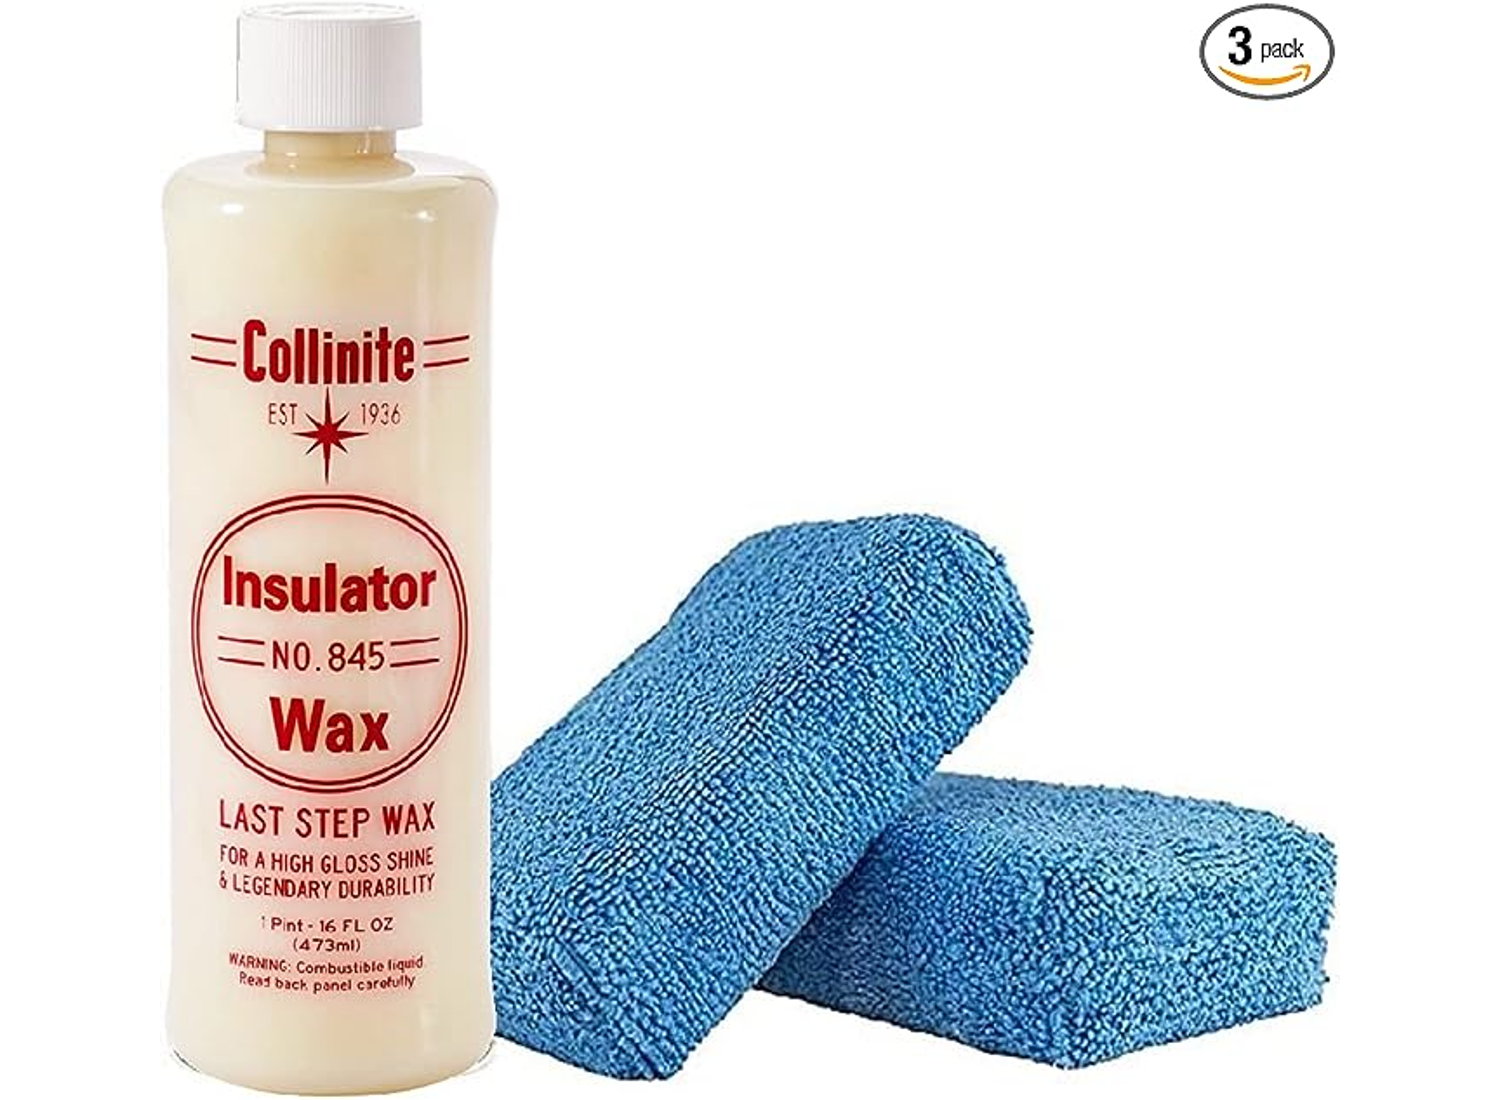 A see through bottle of cream colored collinite car wax next to two blue sponges on a white background